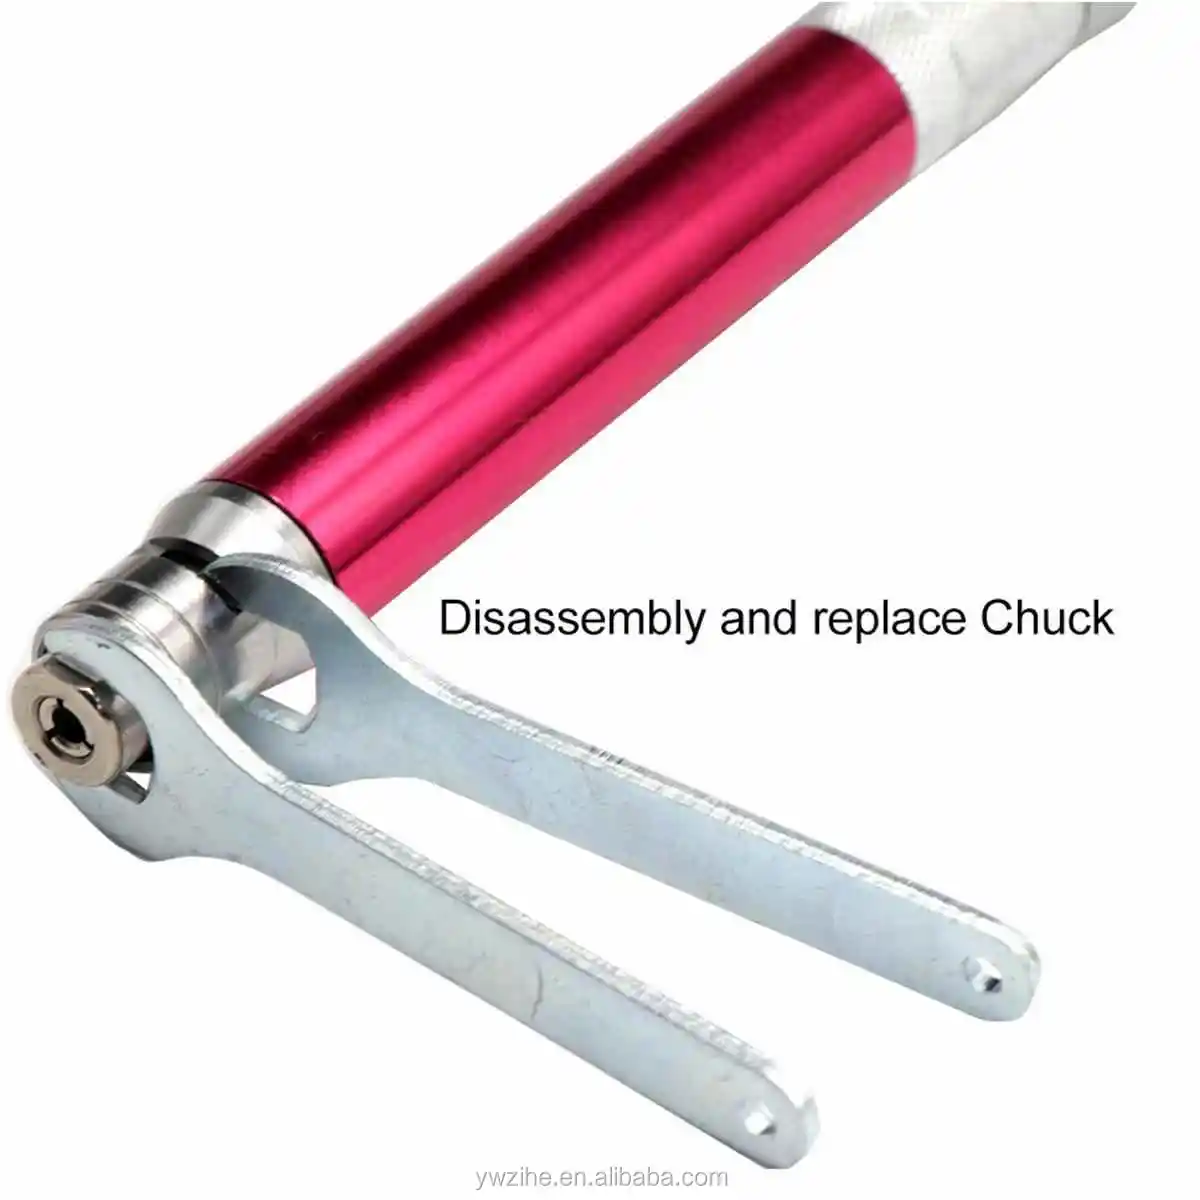 1/8 1/4 High Speed Air Micro Die Grinder Mini Pencil Polishing Engraving Tool Grinding Cutting Pneumatic Tools Include Two Chucks:6mm and 3mm